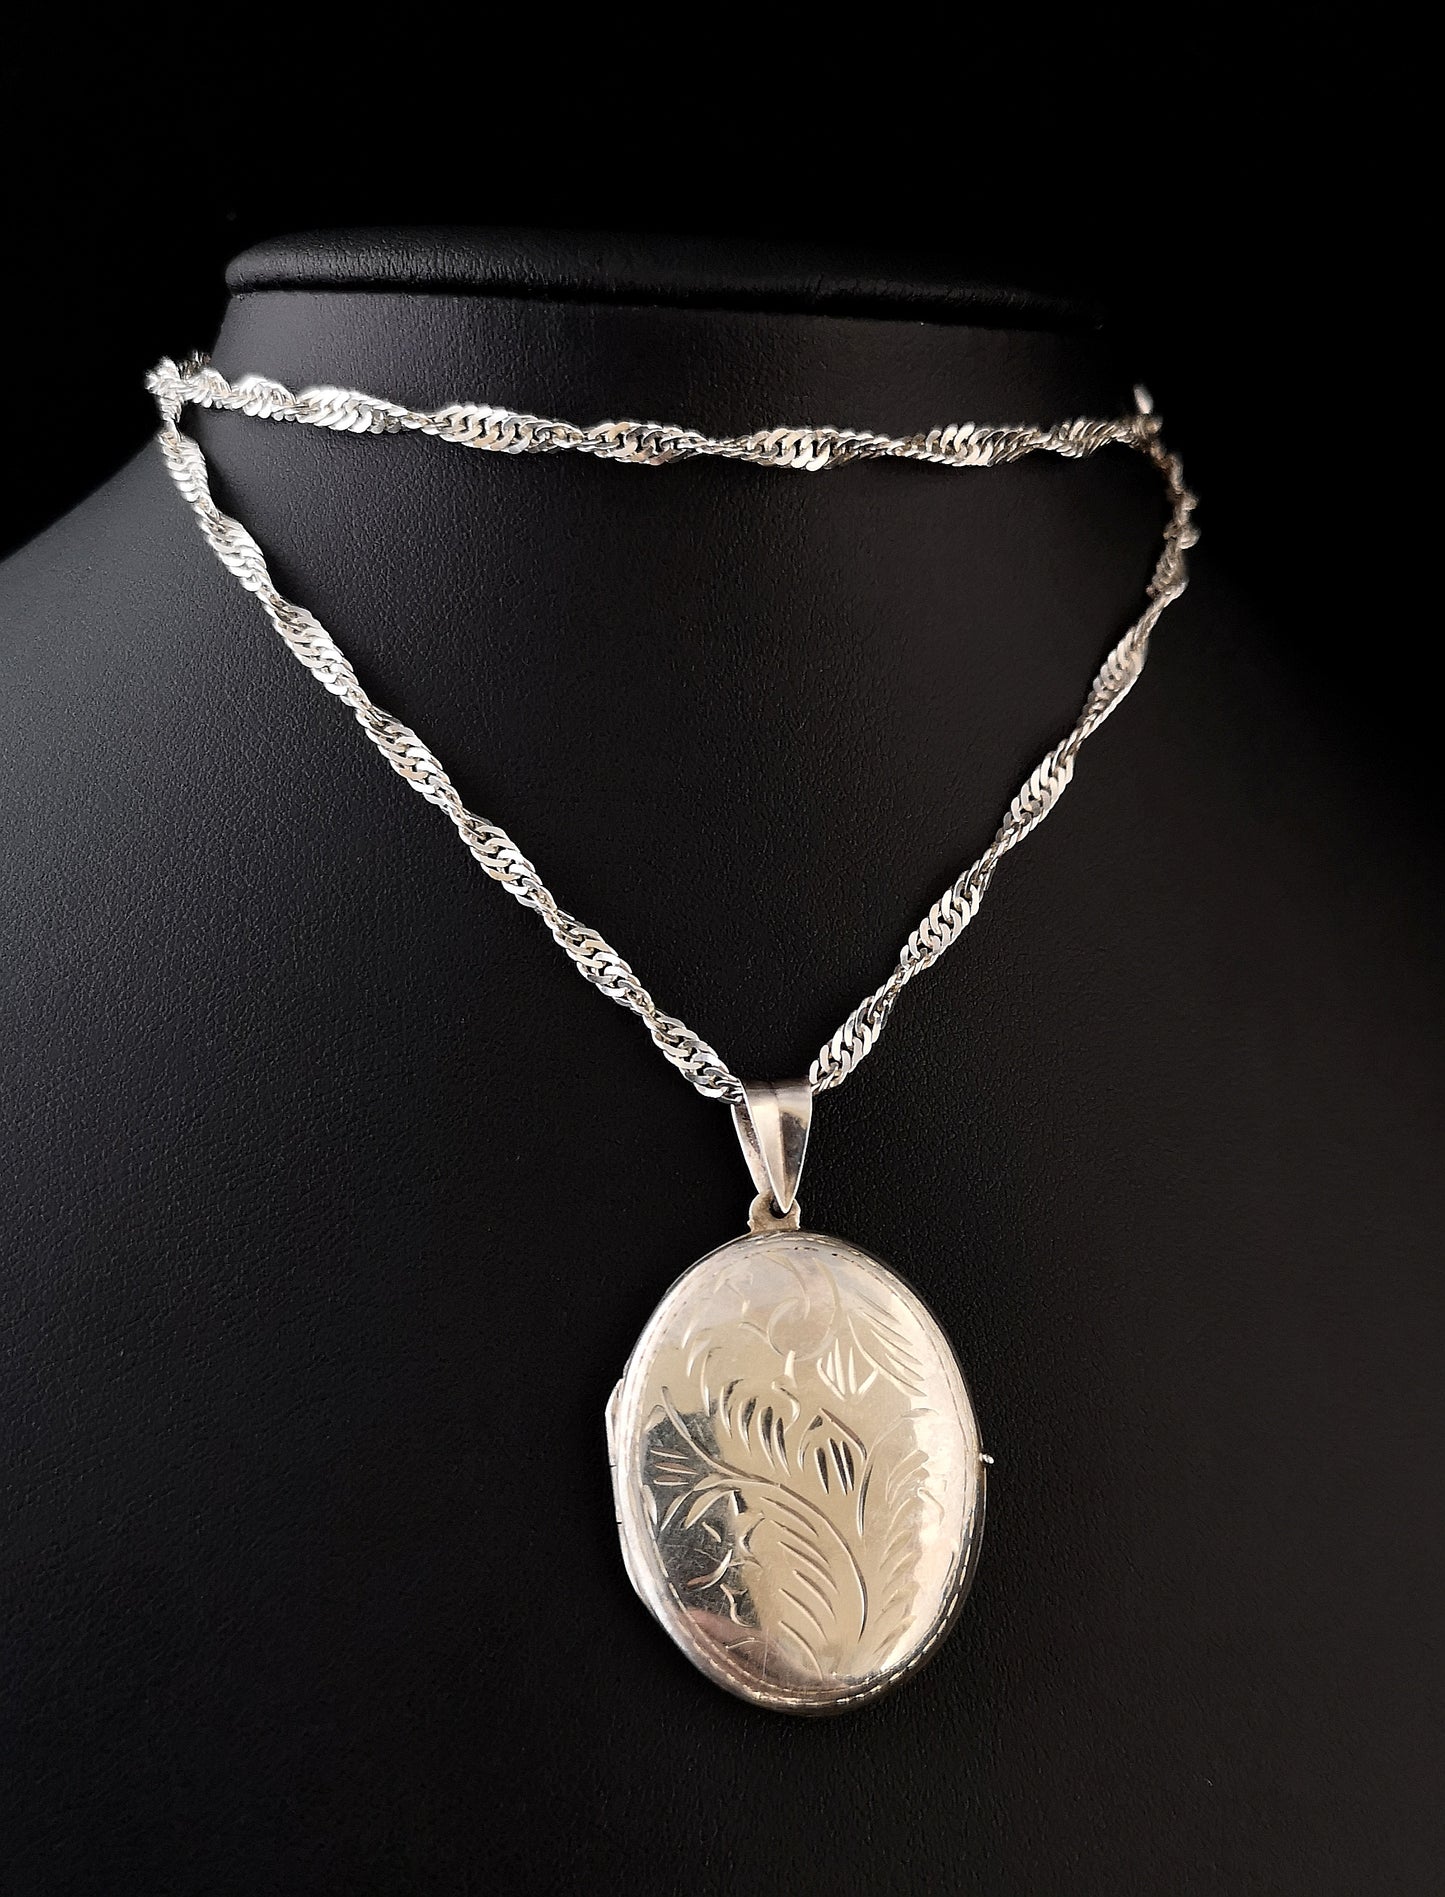 Vintage silver locket and chain, fancy link necklace